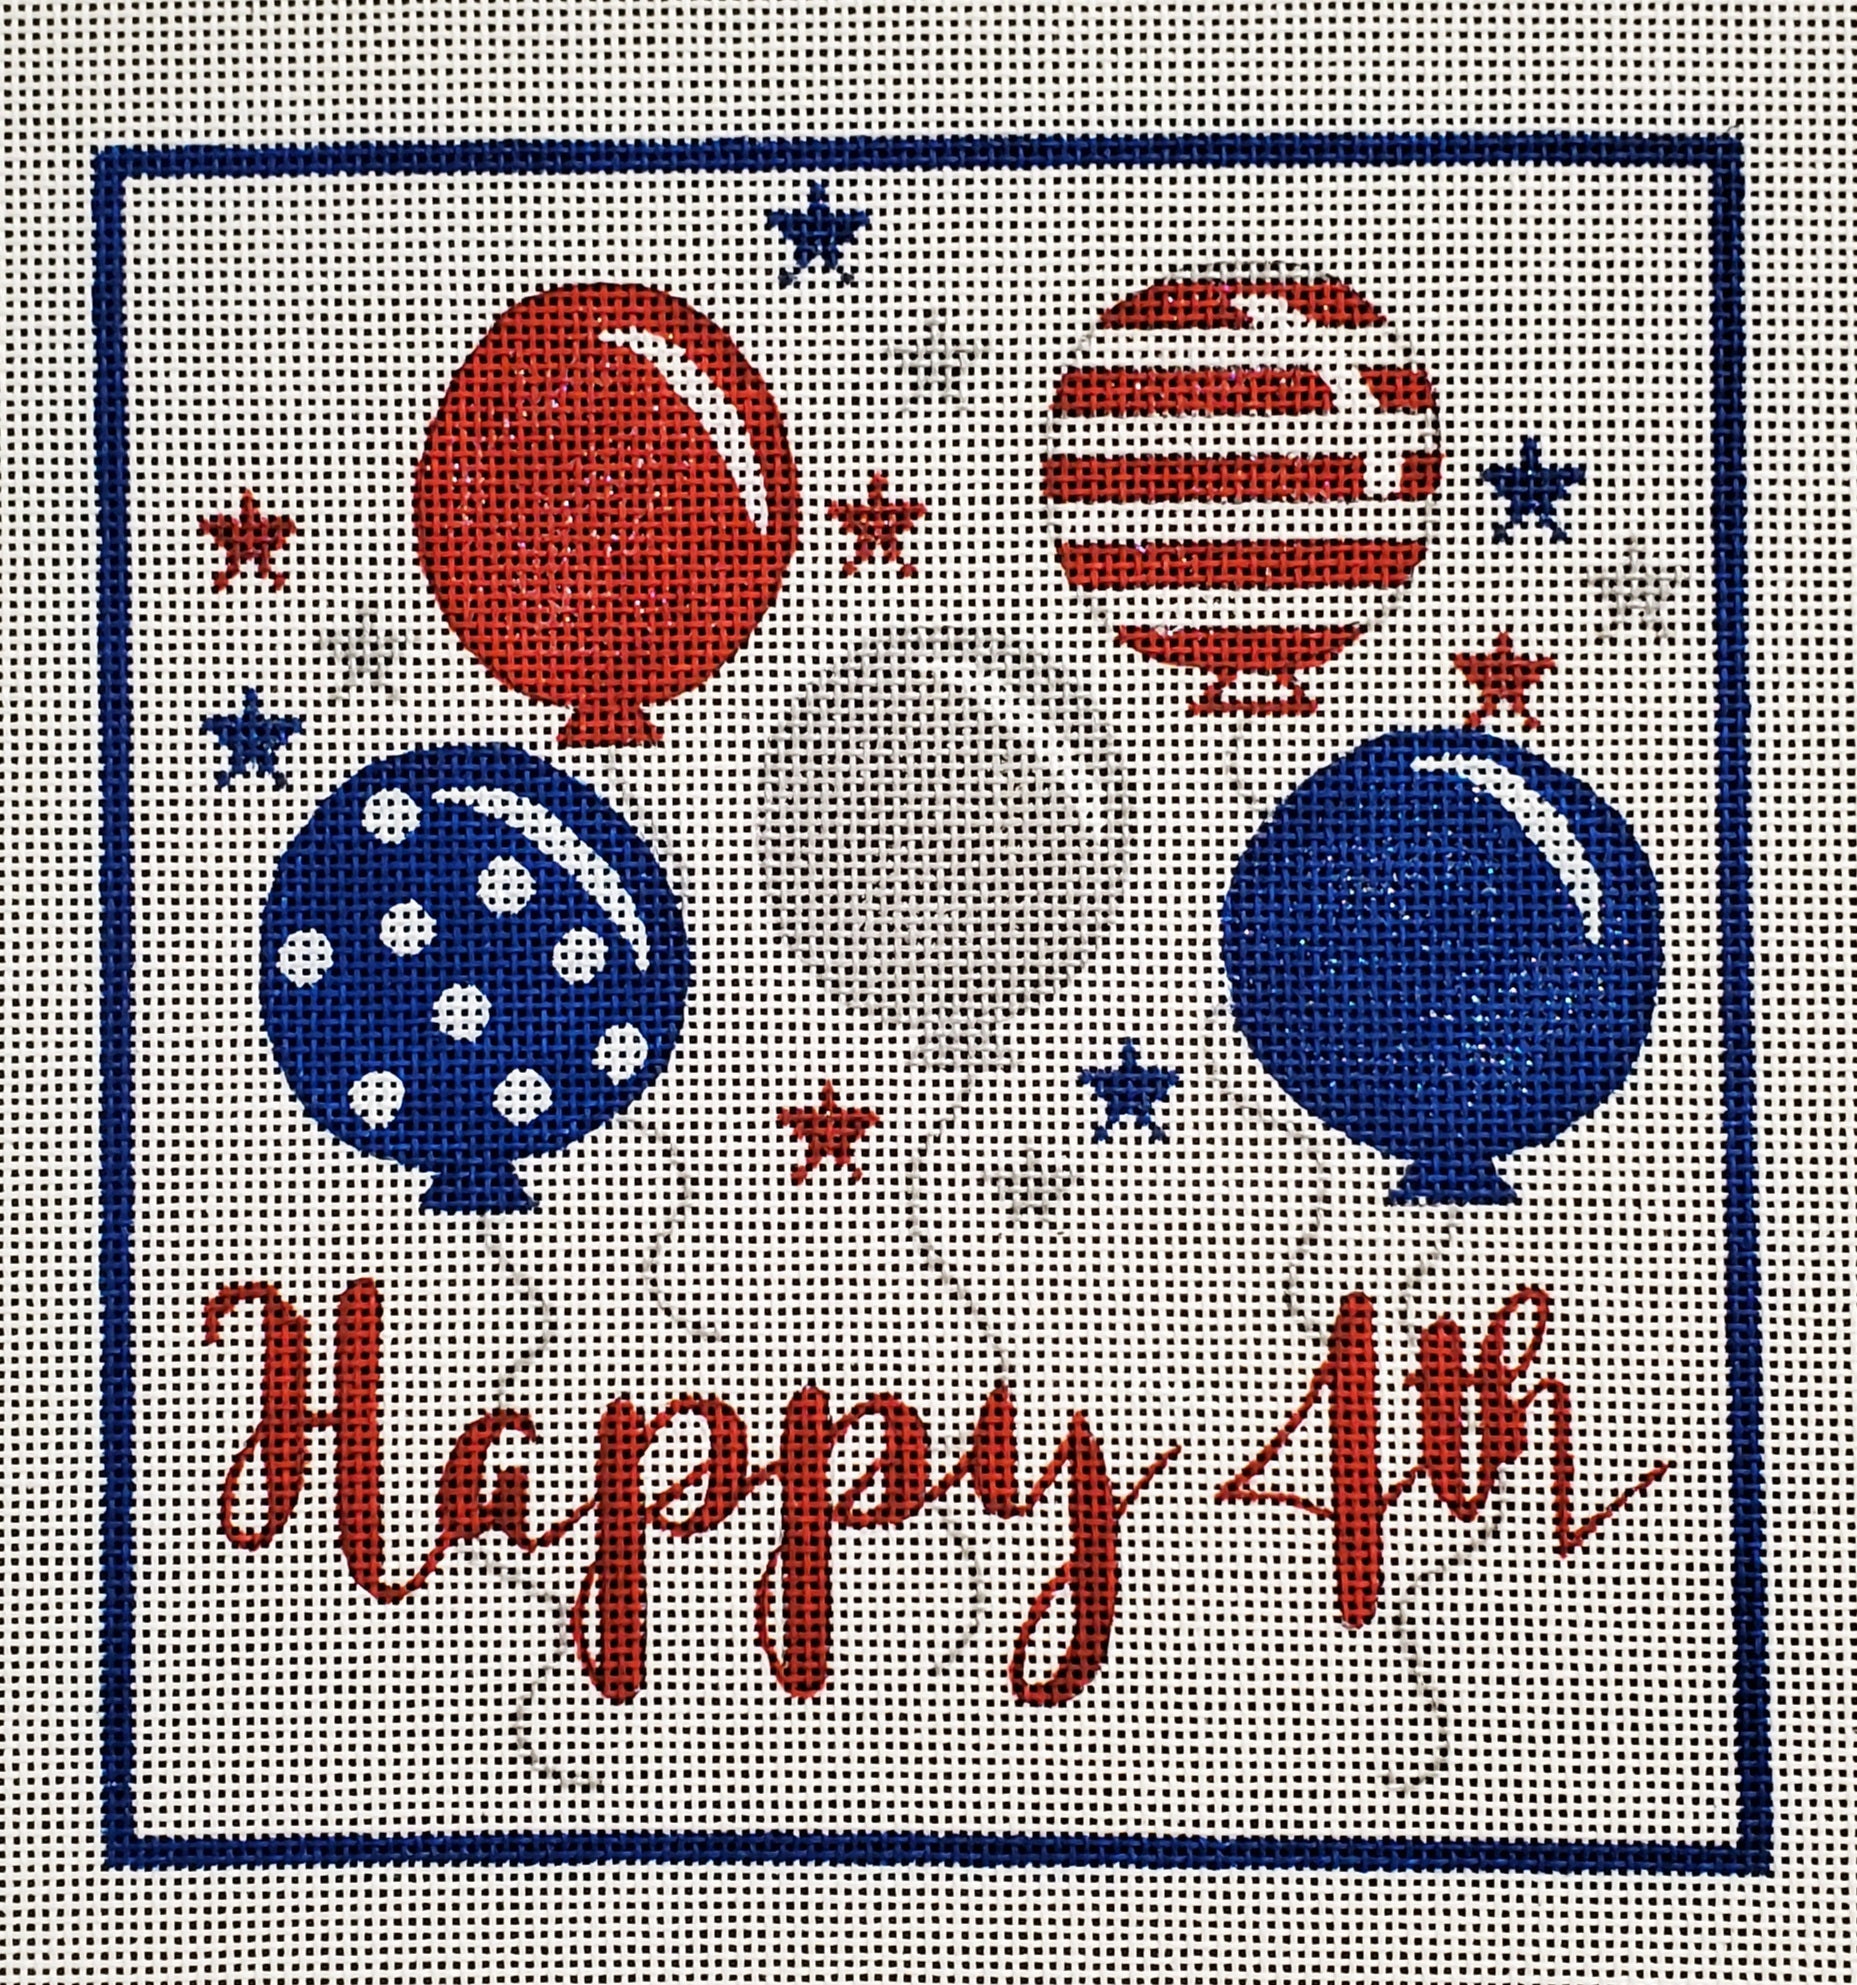 Happy 4th Balloons - The Flying Needles